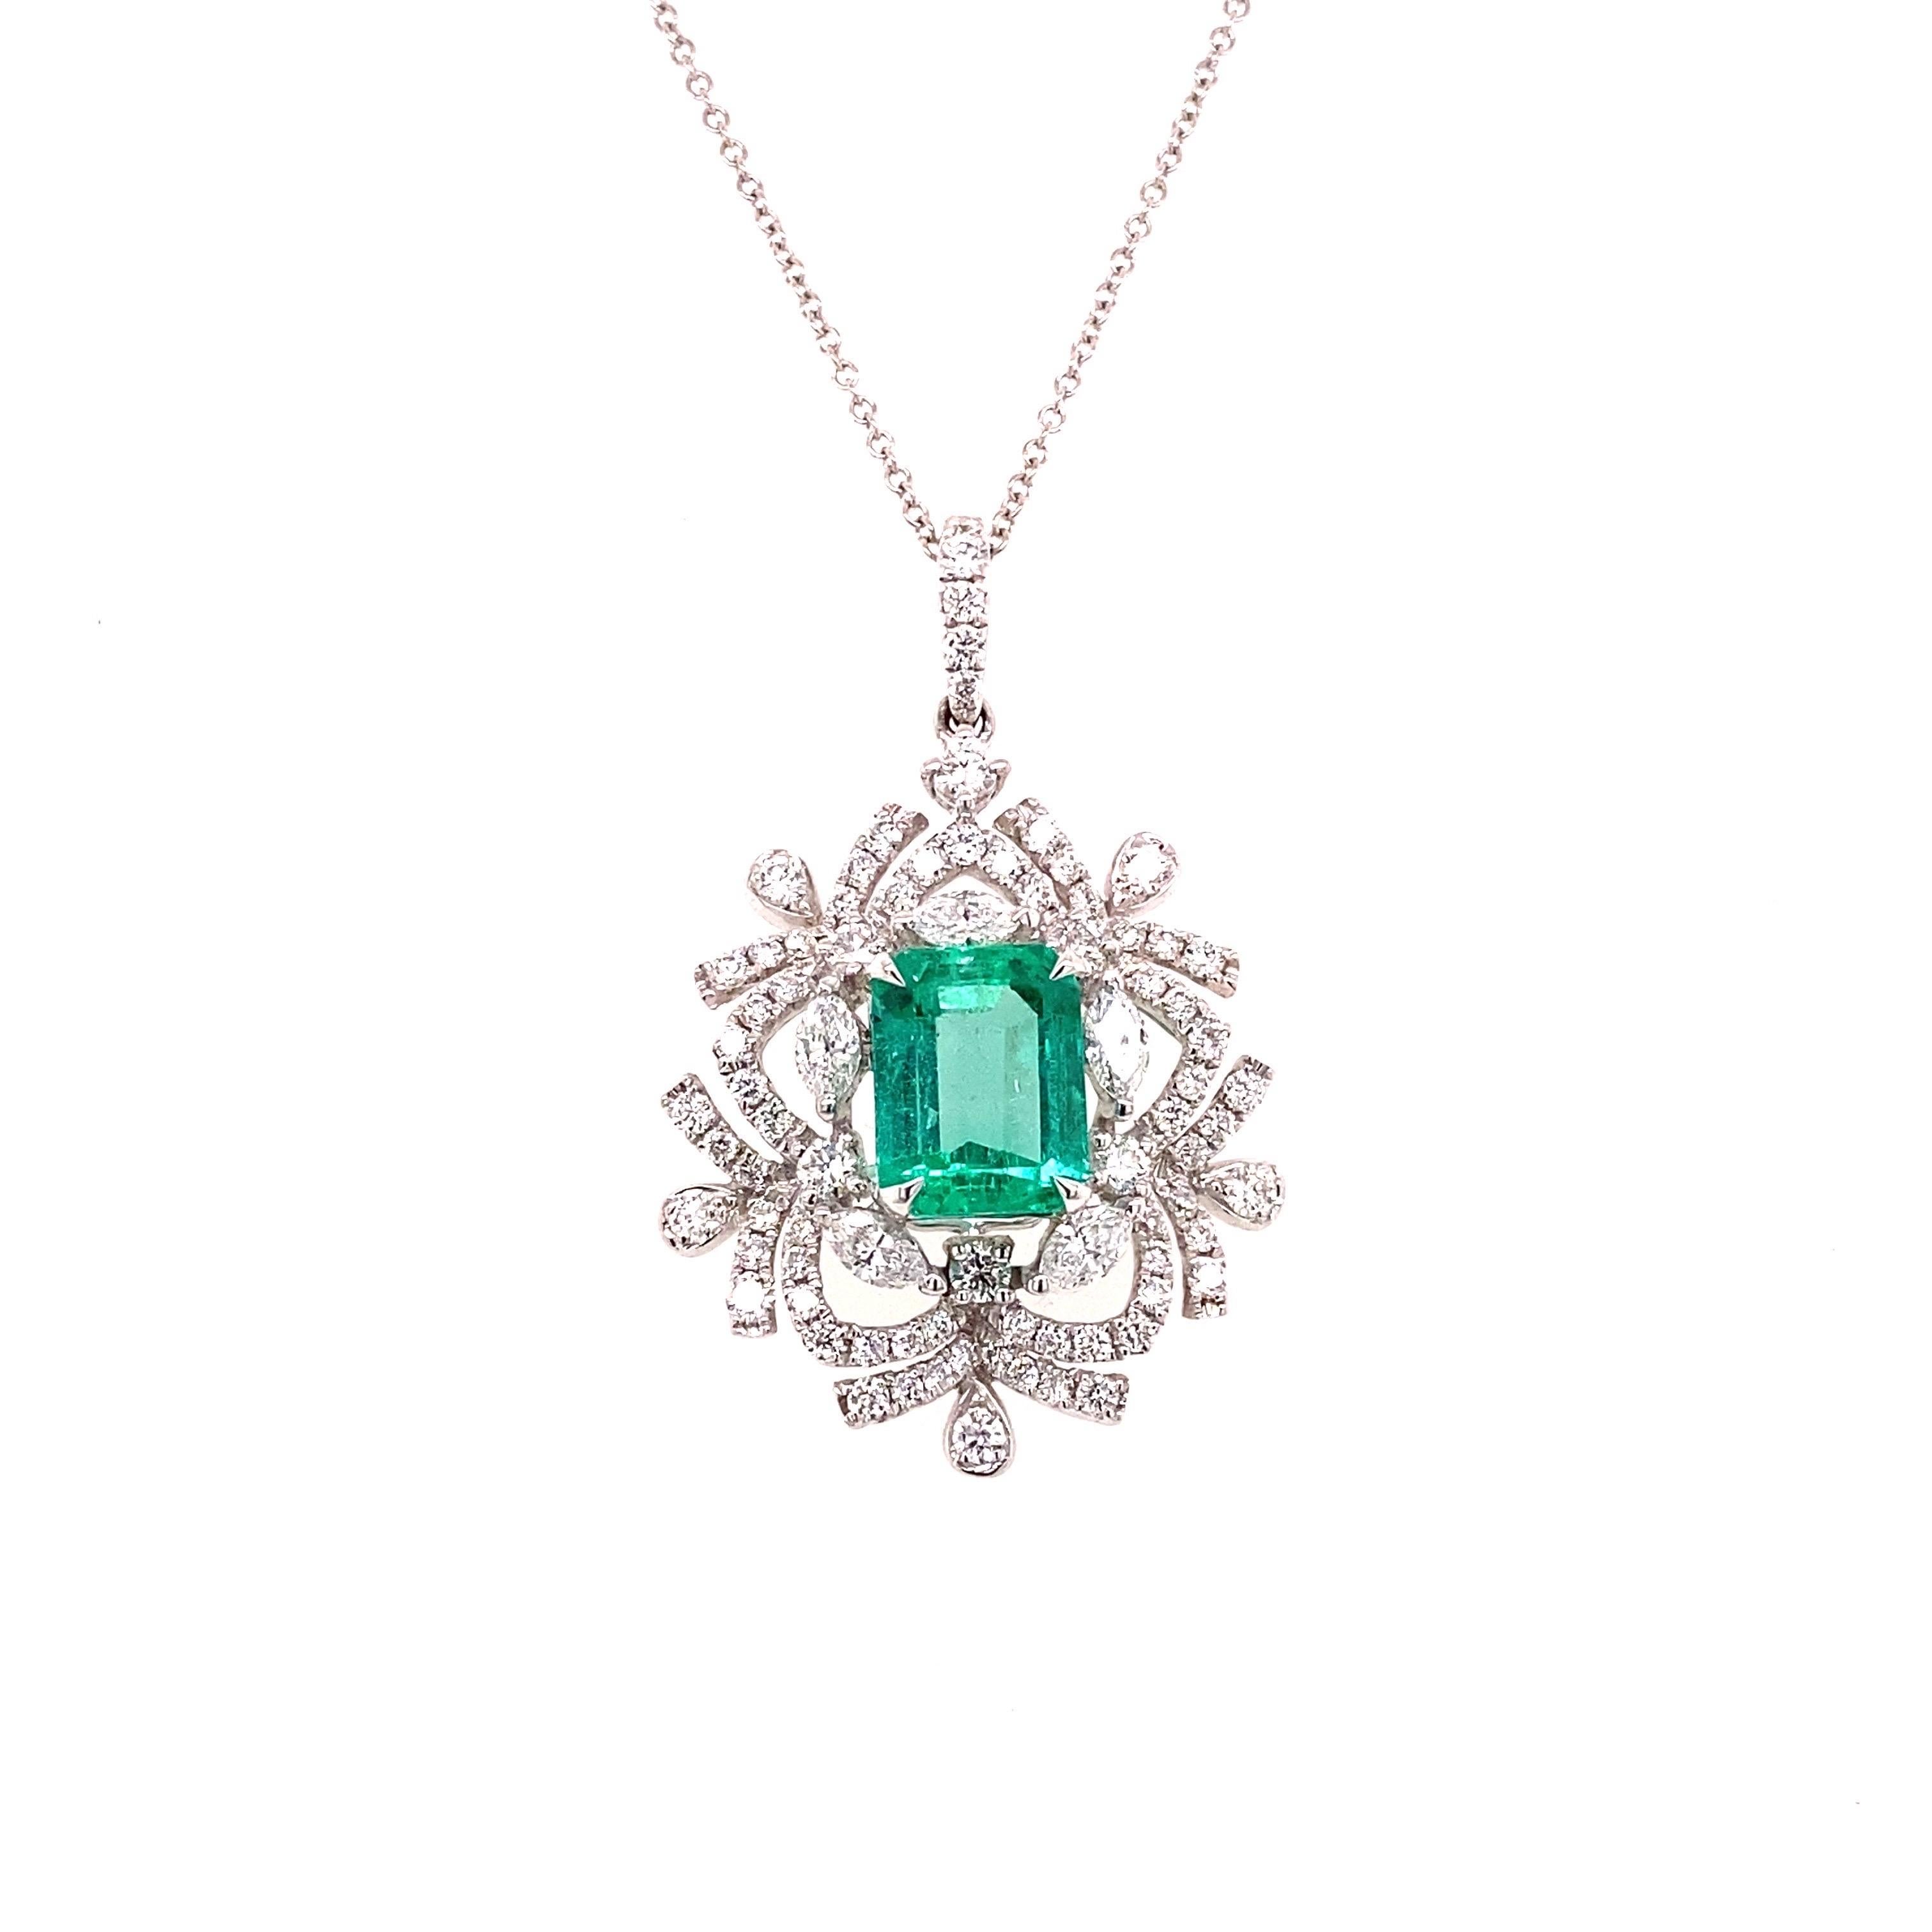 GIA Certified 2.38 Carat Emerald Cut Natural Colombian Emerald Pendant Necklace  4